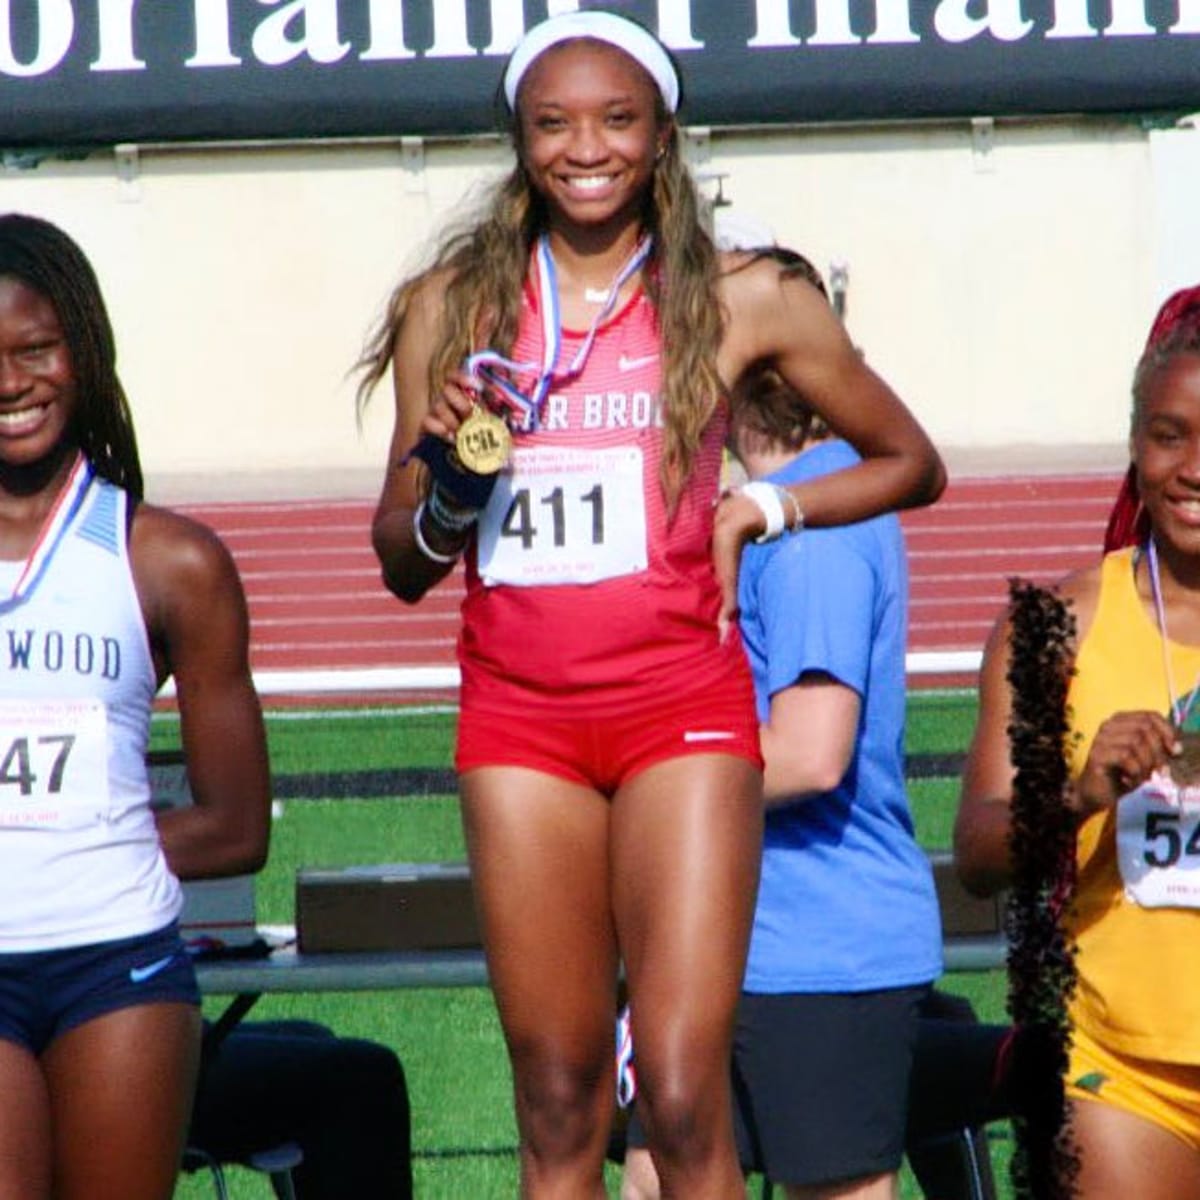 Best sprinters in high school girls track and field: Top 20 entering 2023 -  Sports Illustrated High School News, Analysis and More